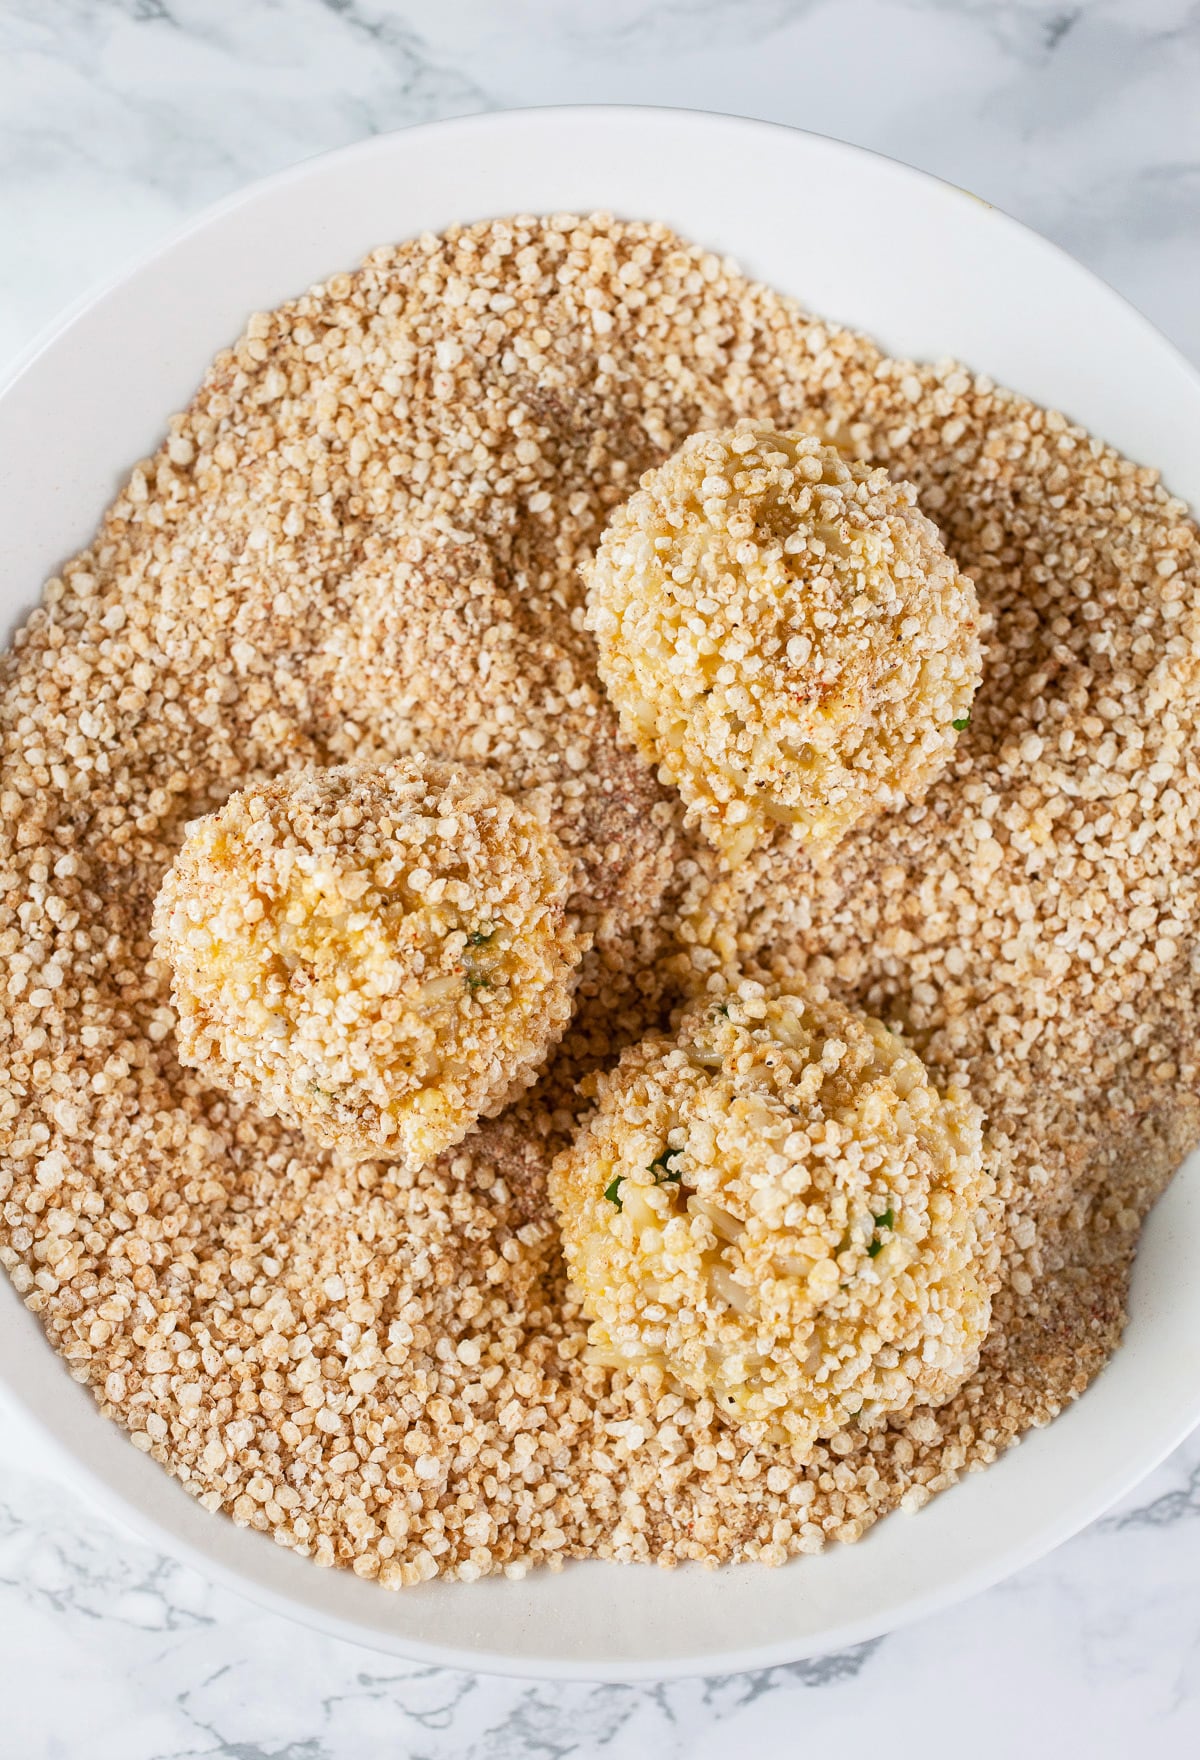 Rice balls coated in breadcrumb mixture in white bowl.